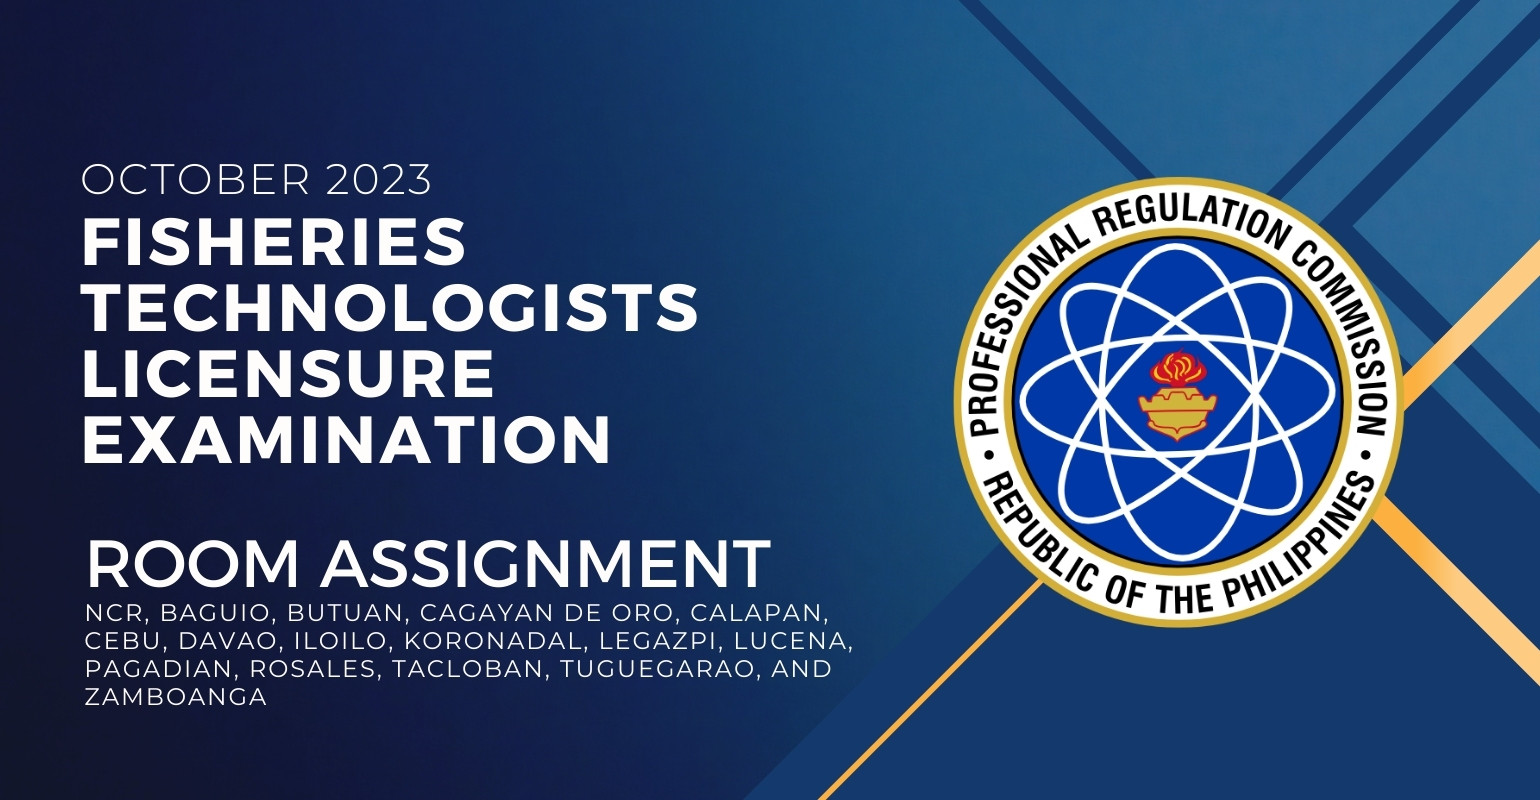 room assignment october 2023 fisheries technologists licensure exam